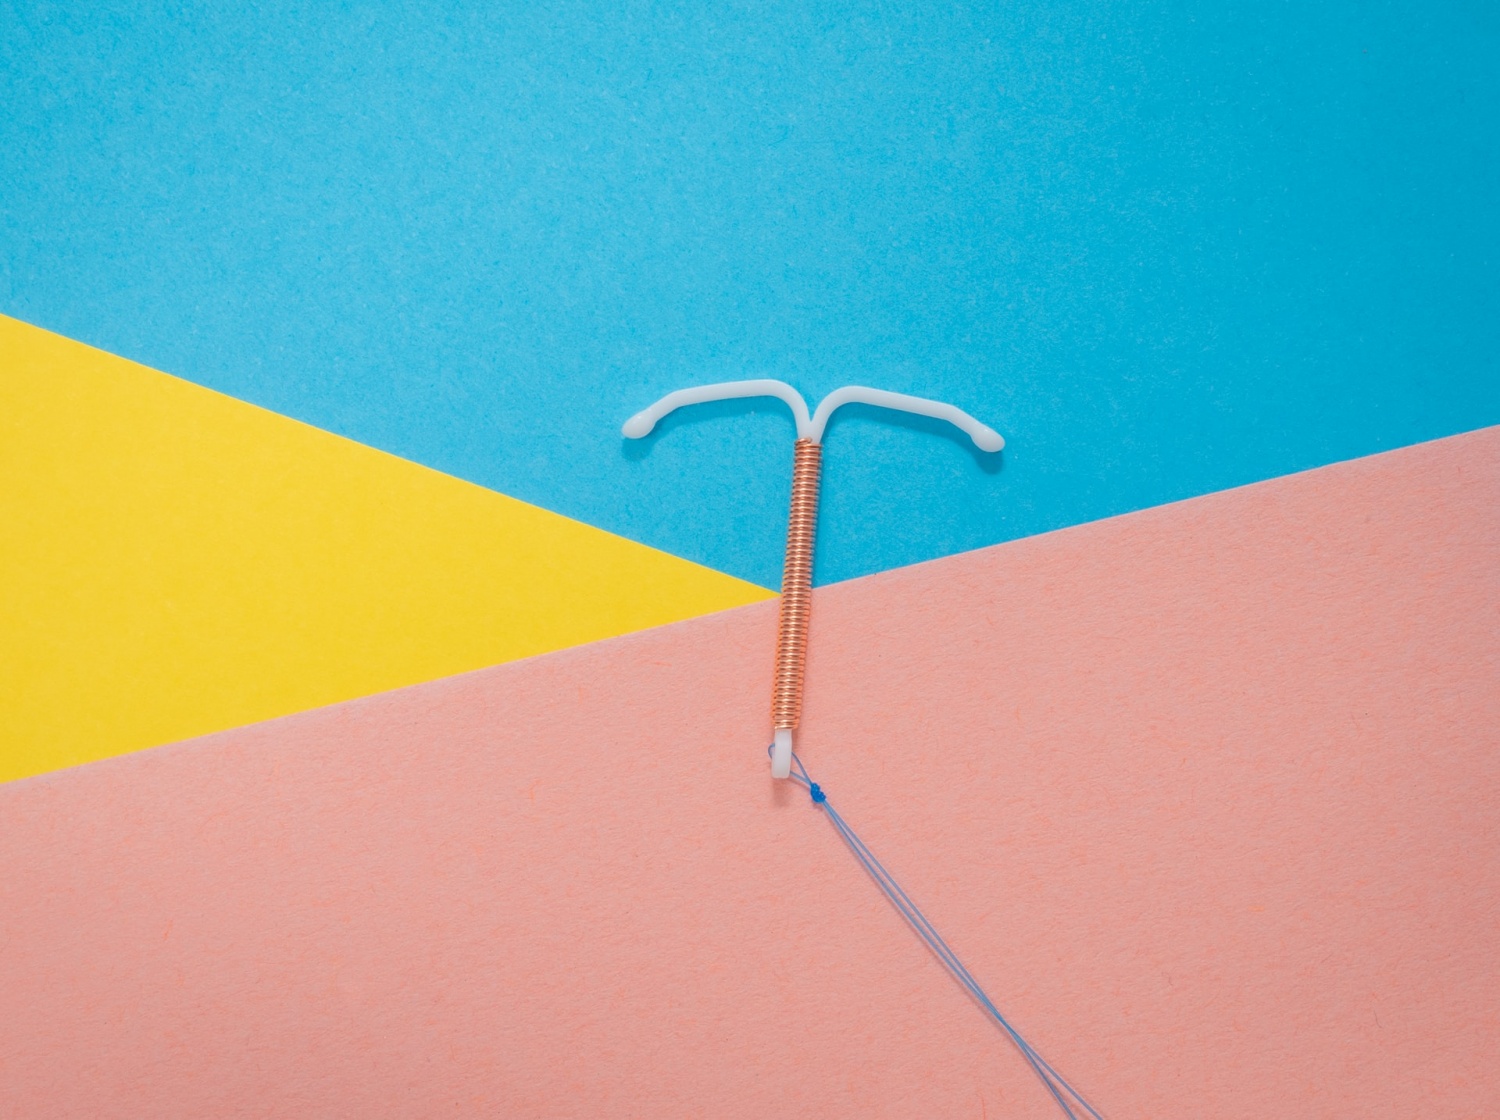 Tiktok Trend: Women Share Videos of Them Removing IUDs, But is it Safe?